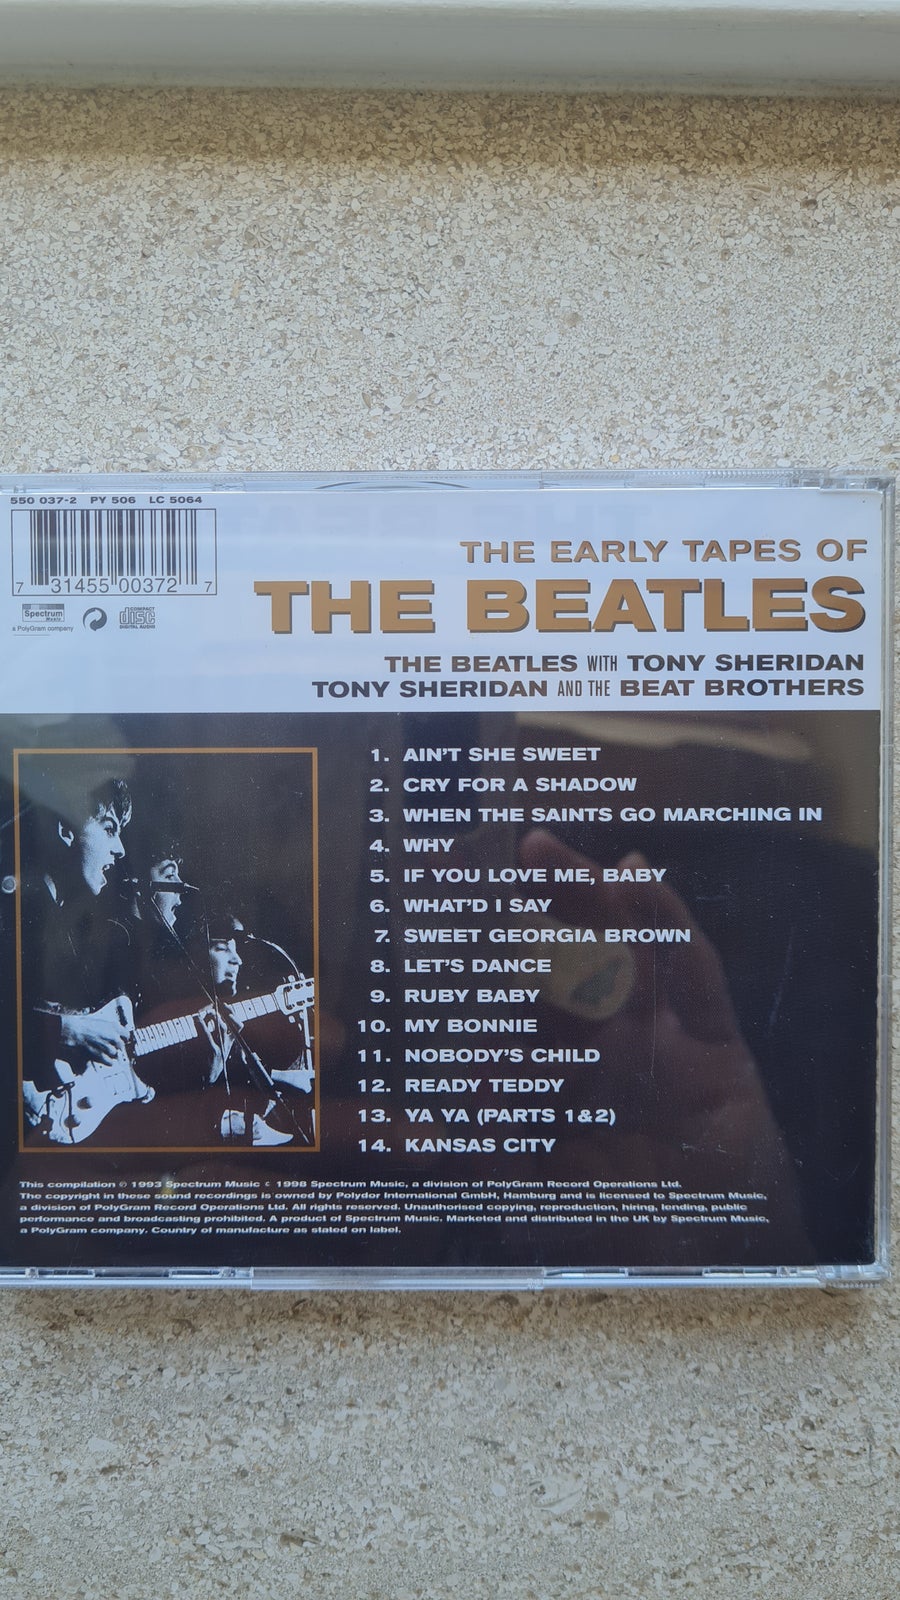 THE BEATLES: THE EARLY TAPES OF., rock